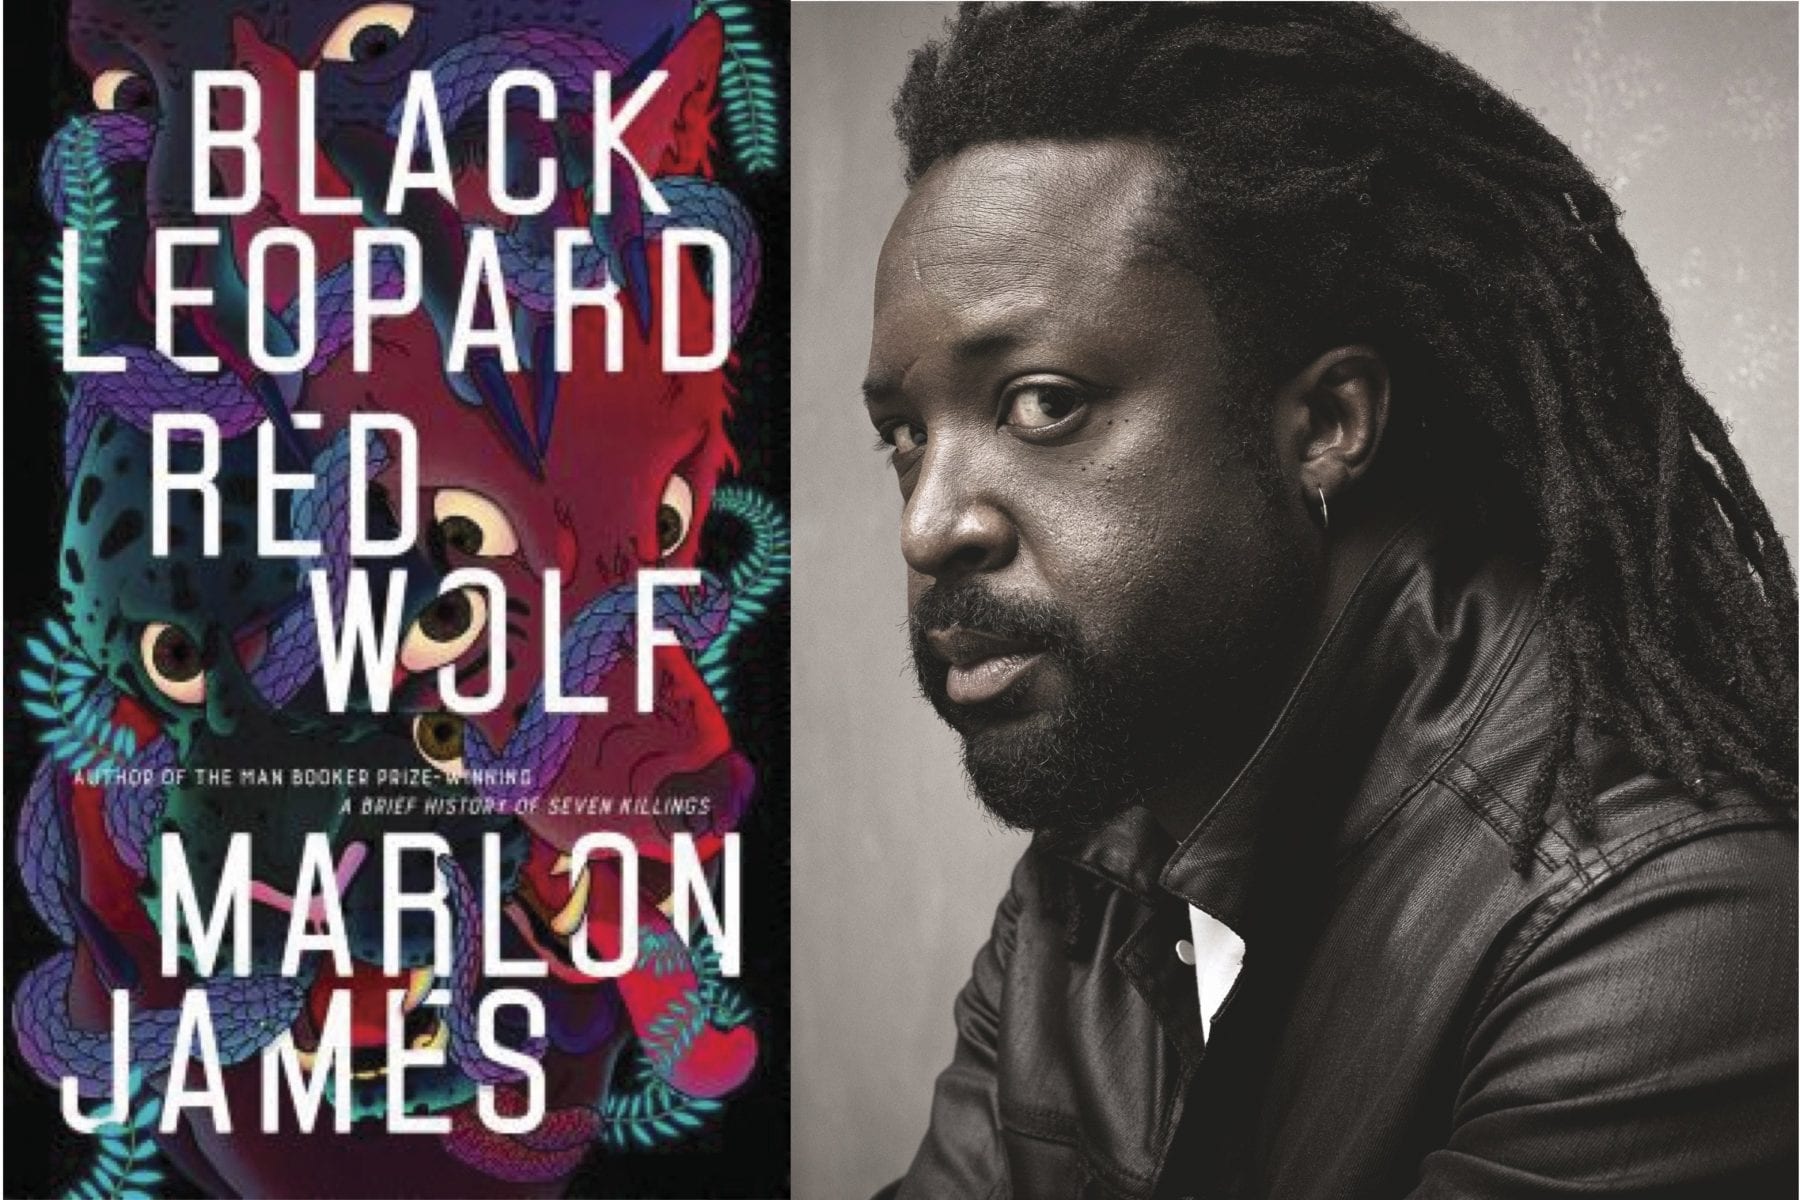 Marlon James is the author of Black Leopard